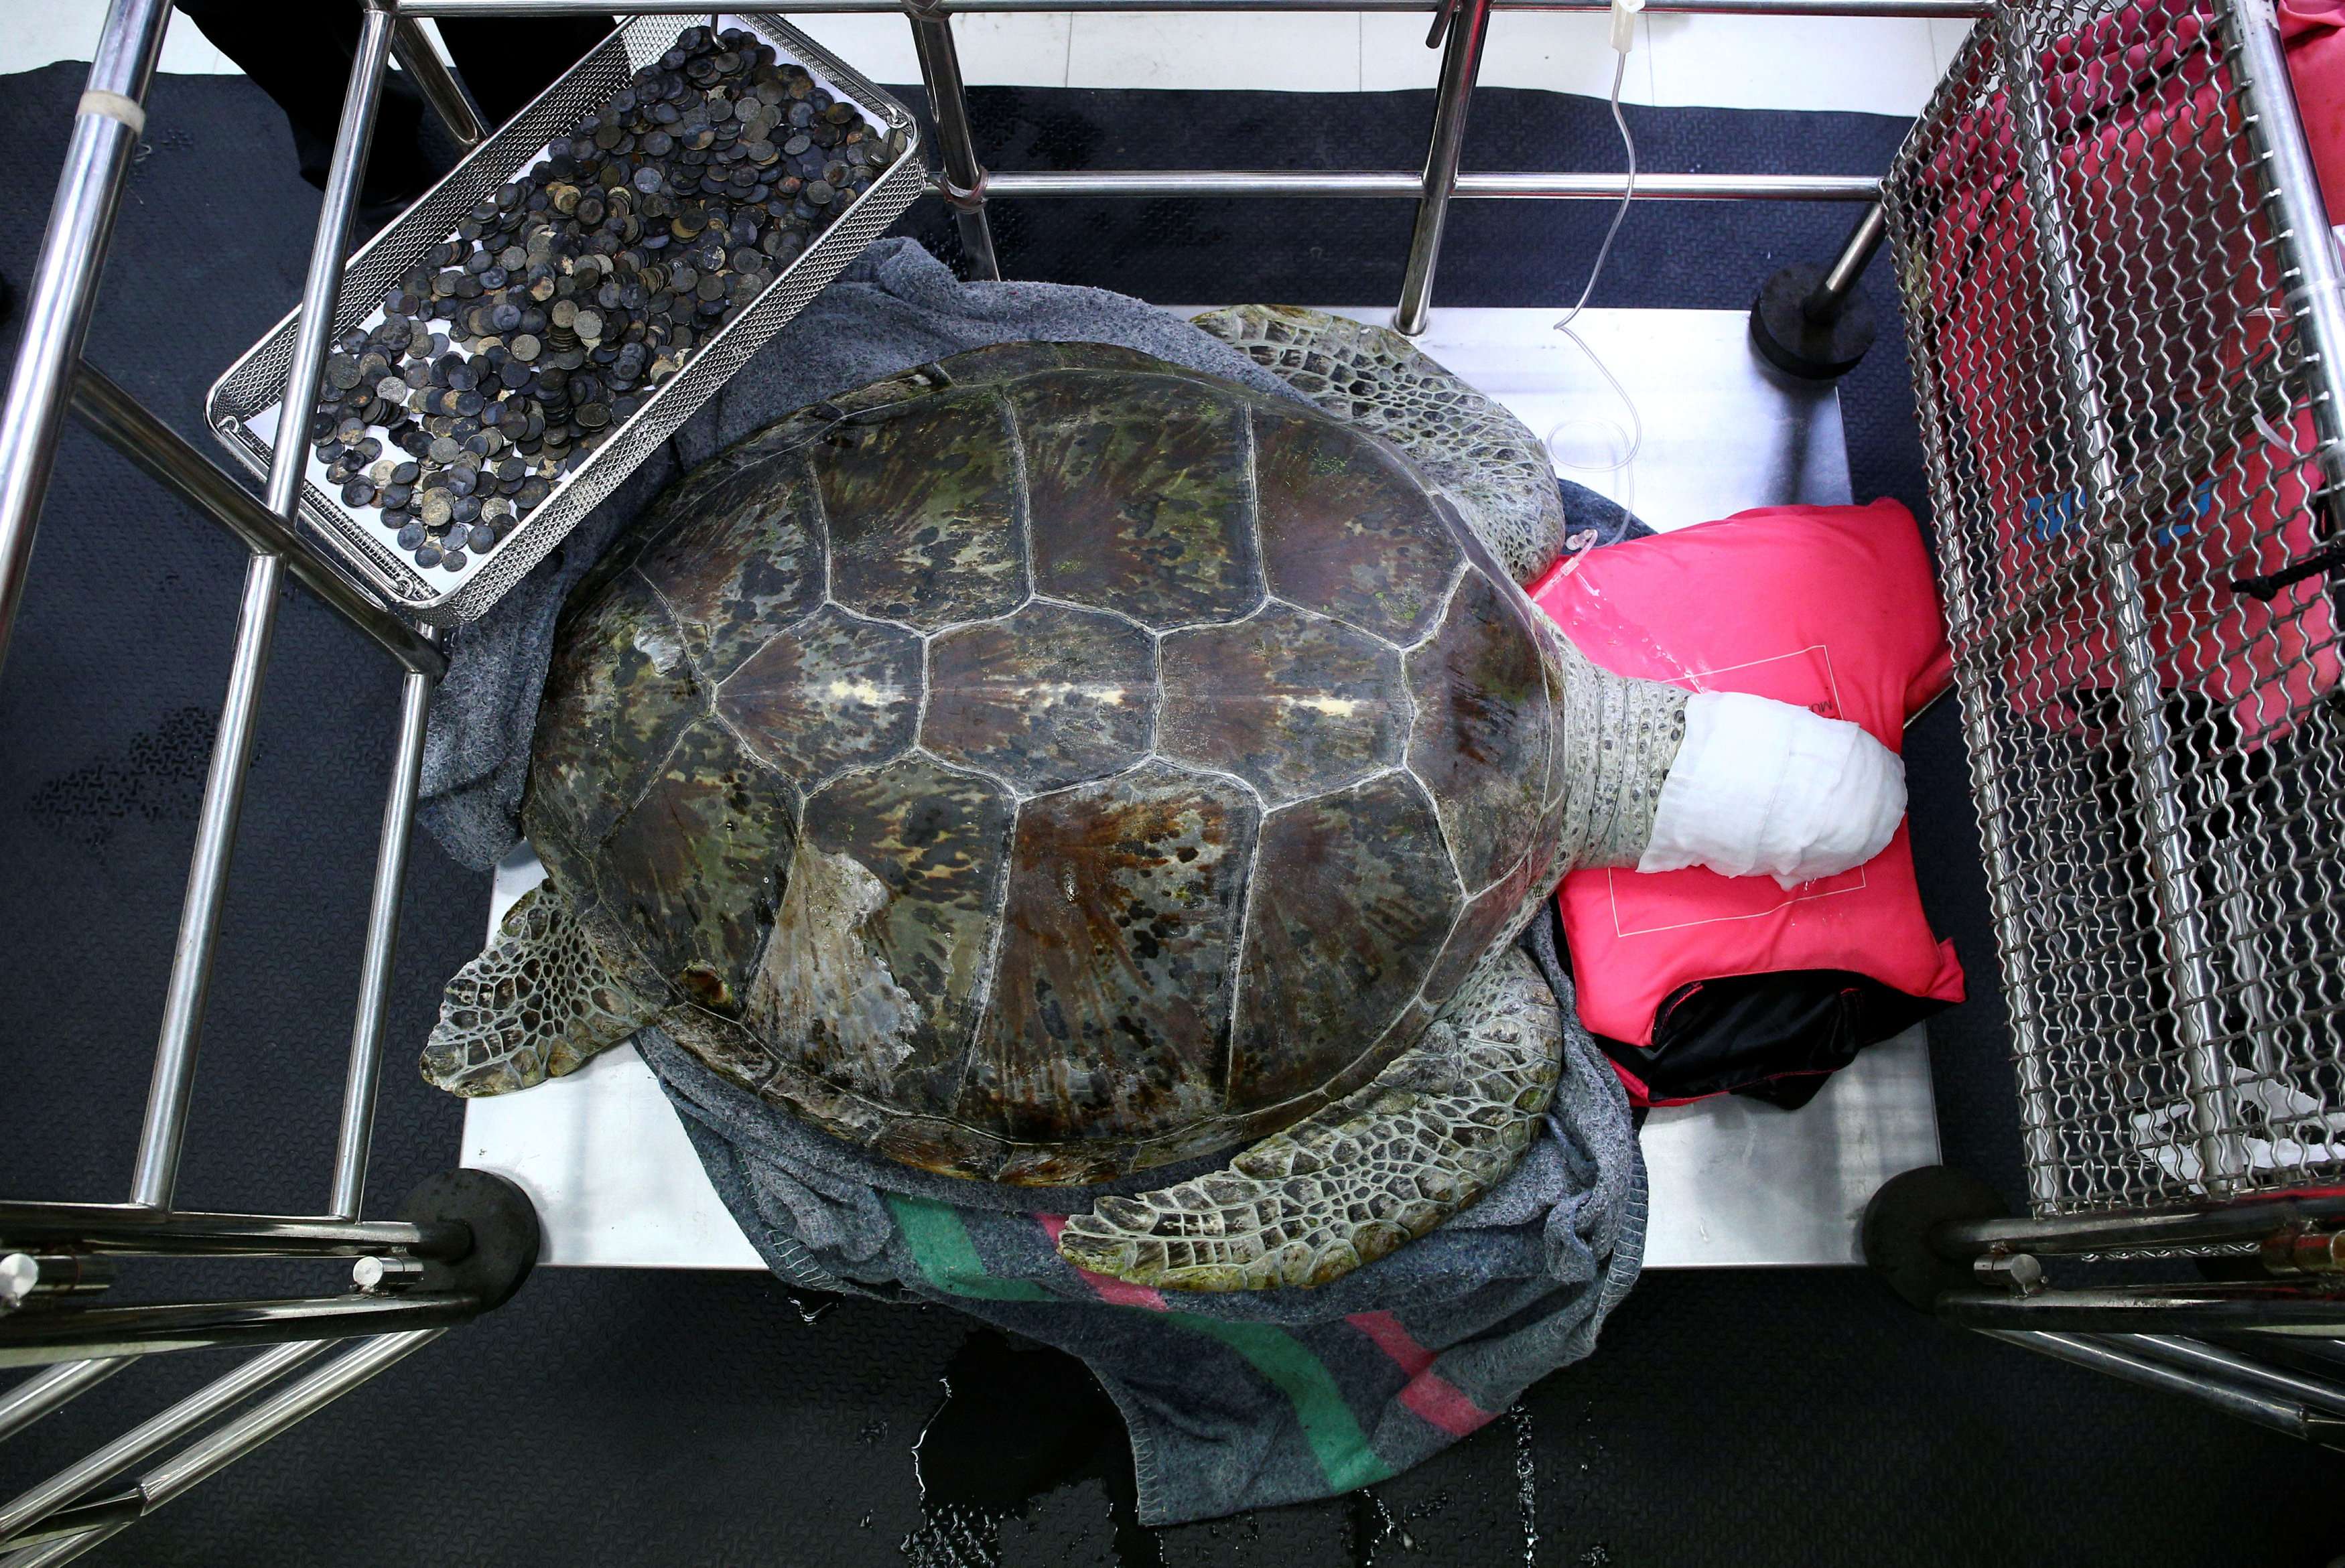 This revered turtle was offered coins as a blessing. She ate 5kg of them and nearly died | South China Morning Post